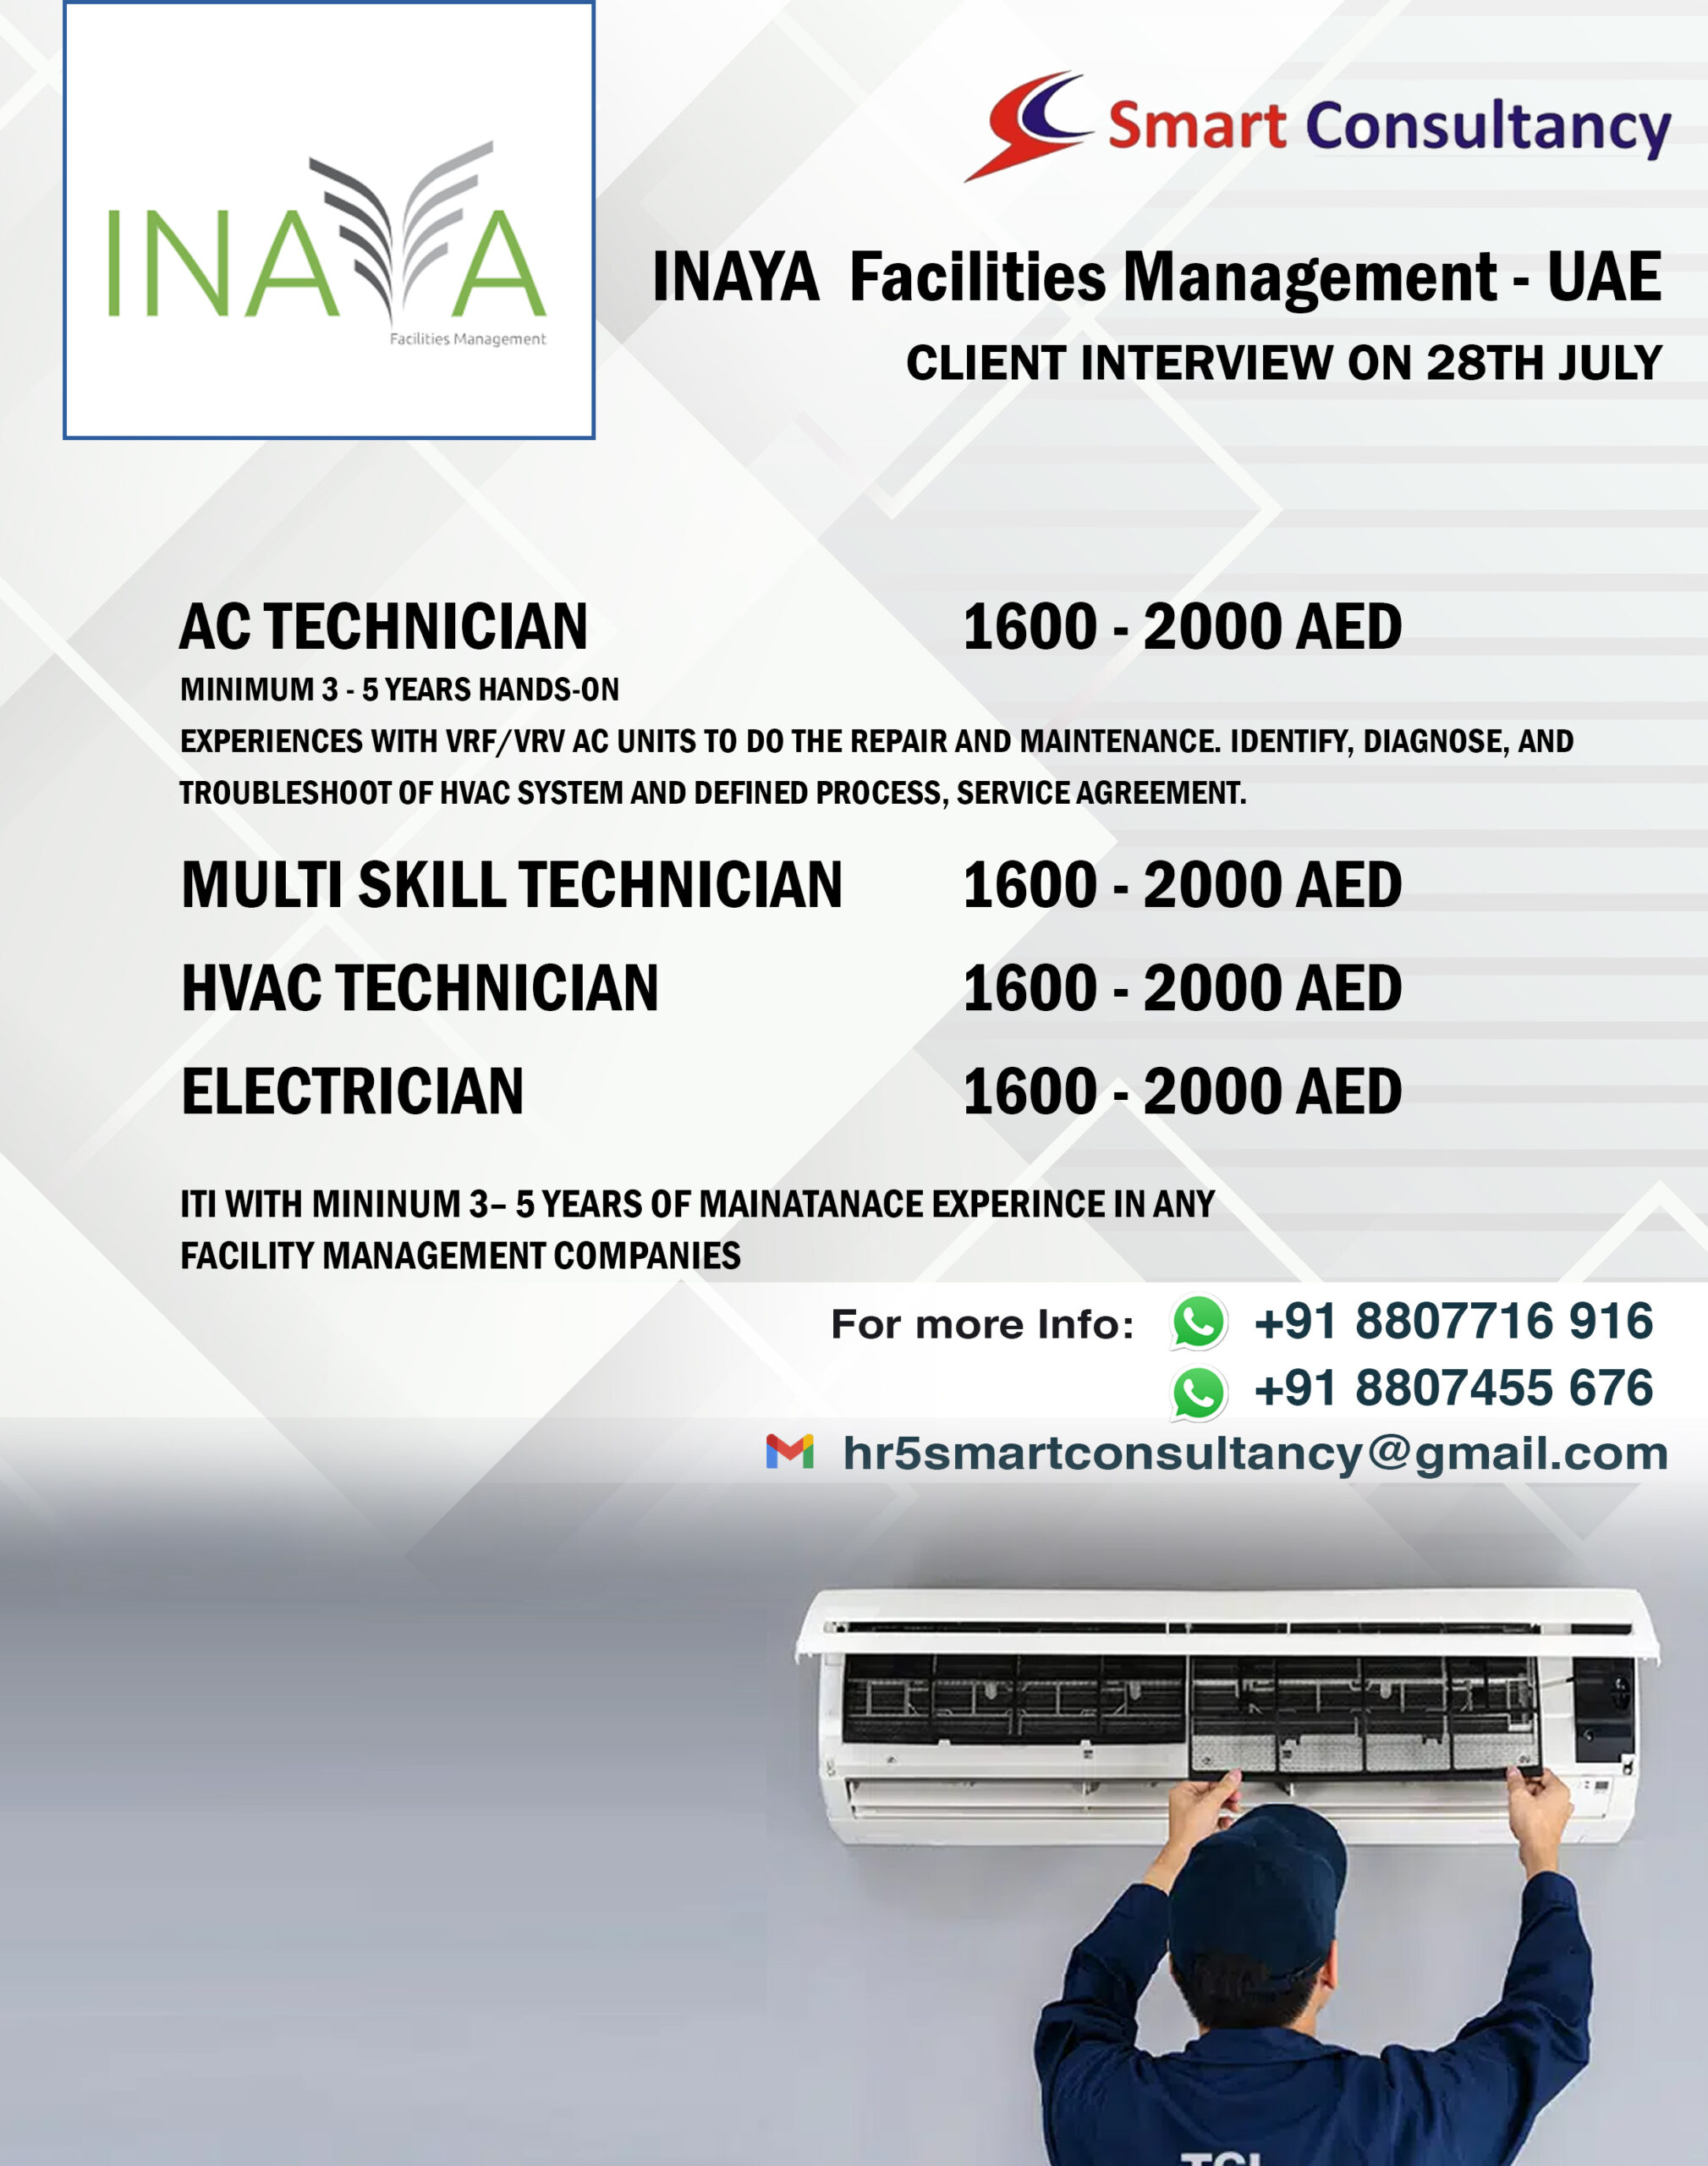 WANTED FOR UAE  INAYA  Facilities Management – Dubai  Direct Client online Interview on 28th July